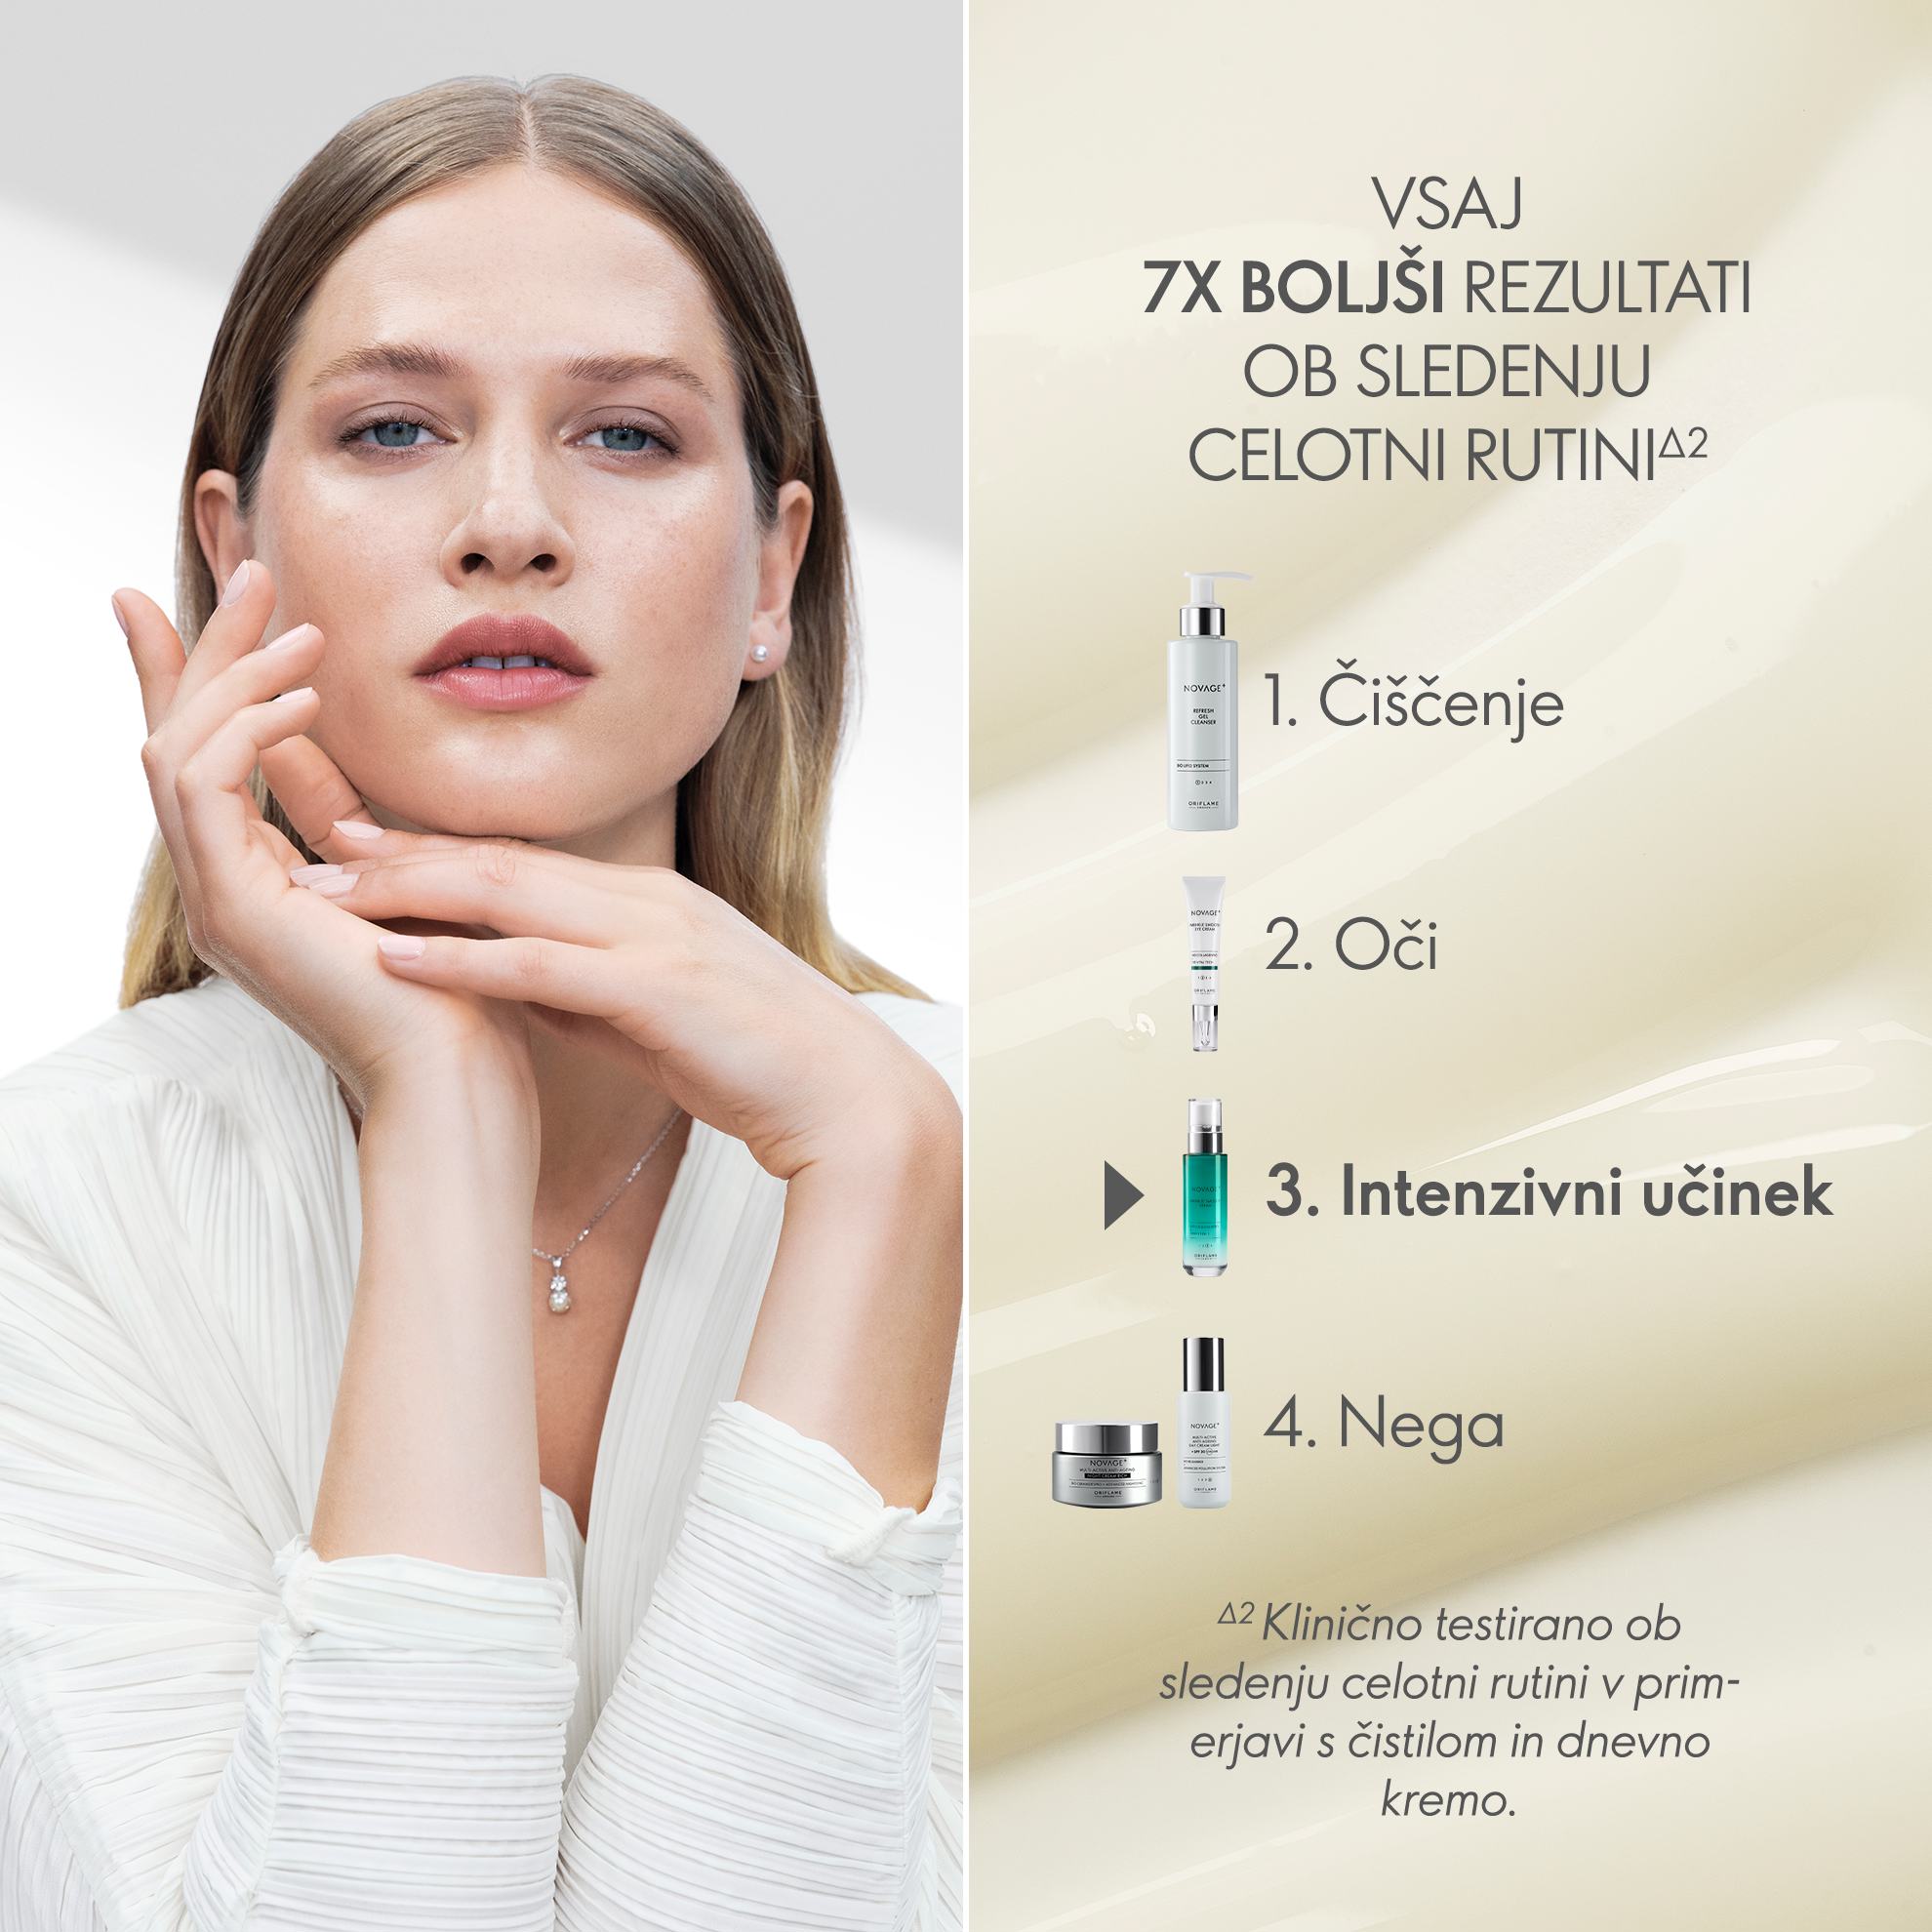 https://media-cdn.oriflame.com/productImage?externalMediaId=product-management-media%2fProducts%2f41035%2fSI%2f41035_5.png&id=17560454&version=2